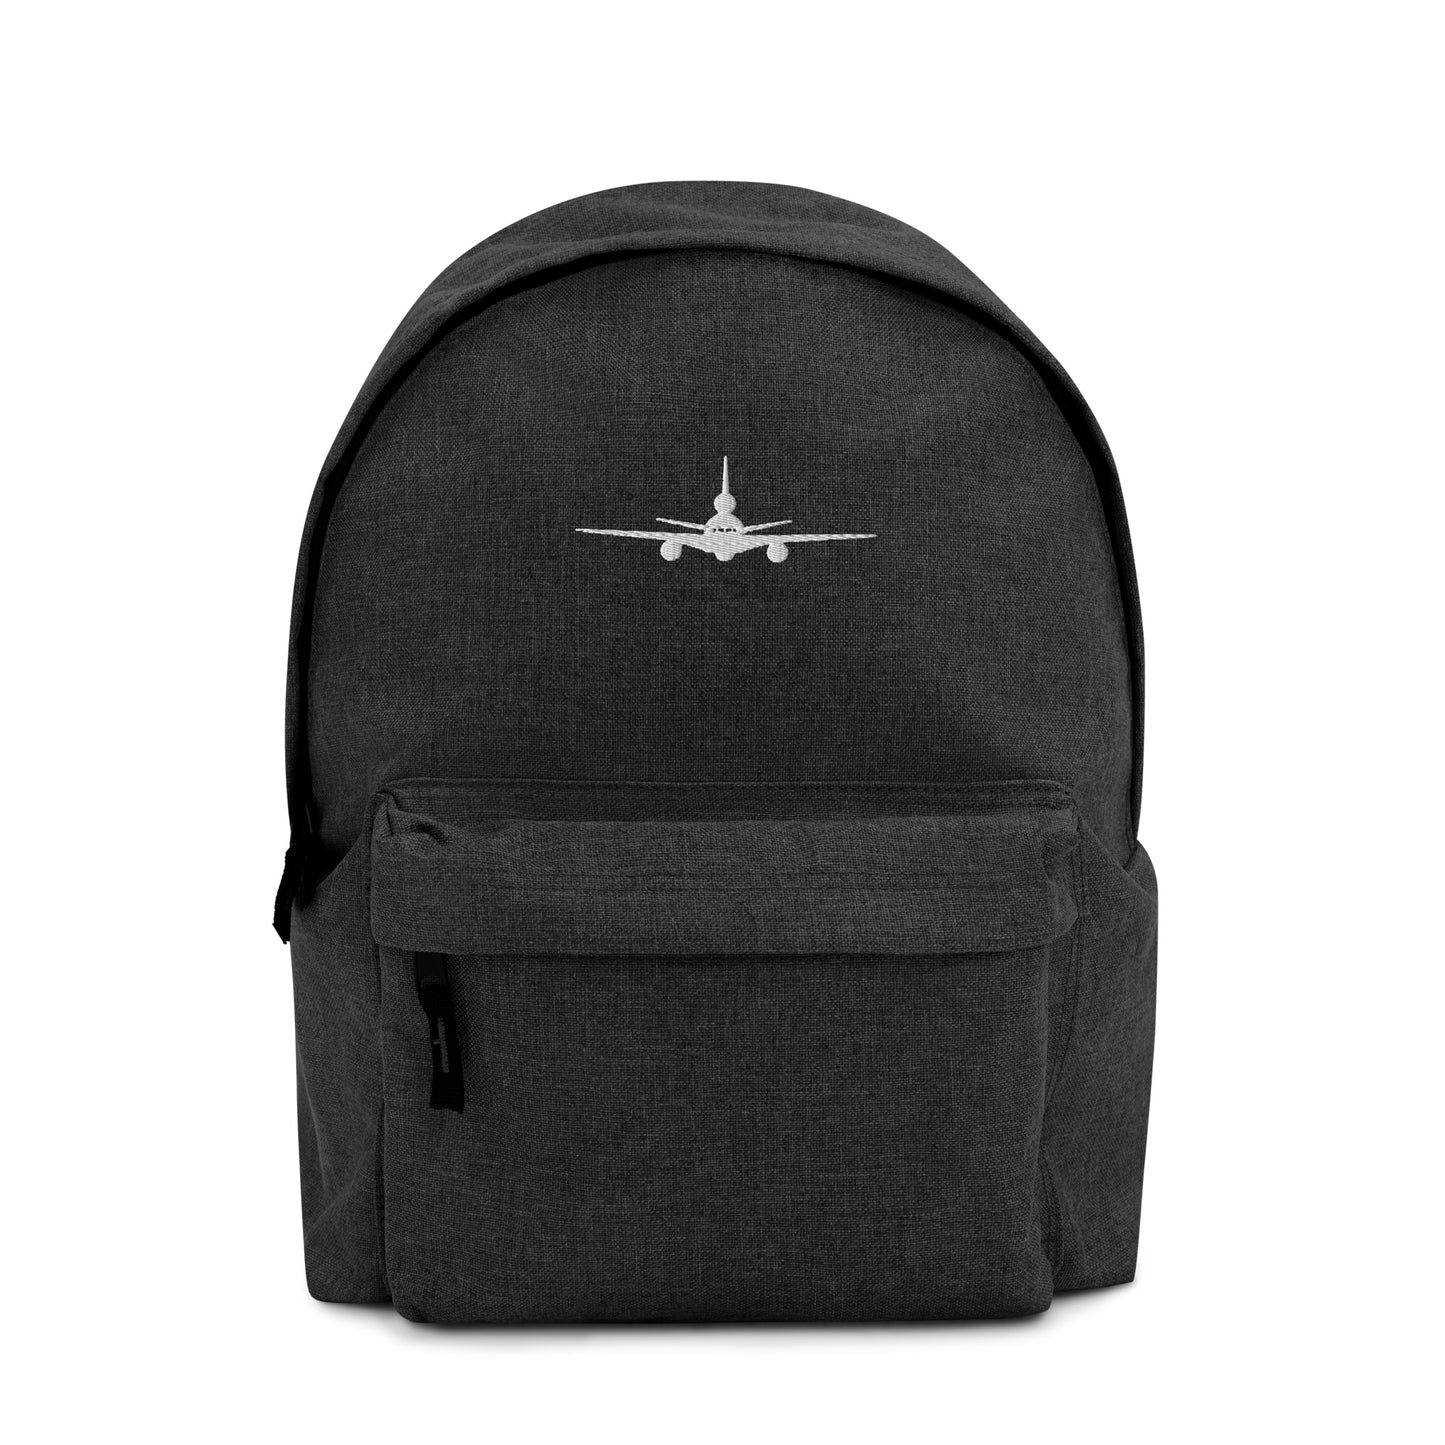 AerialFire DC-10 Embroidered Backpack